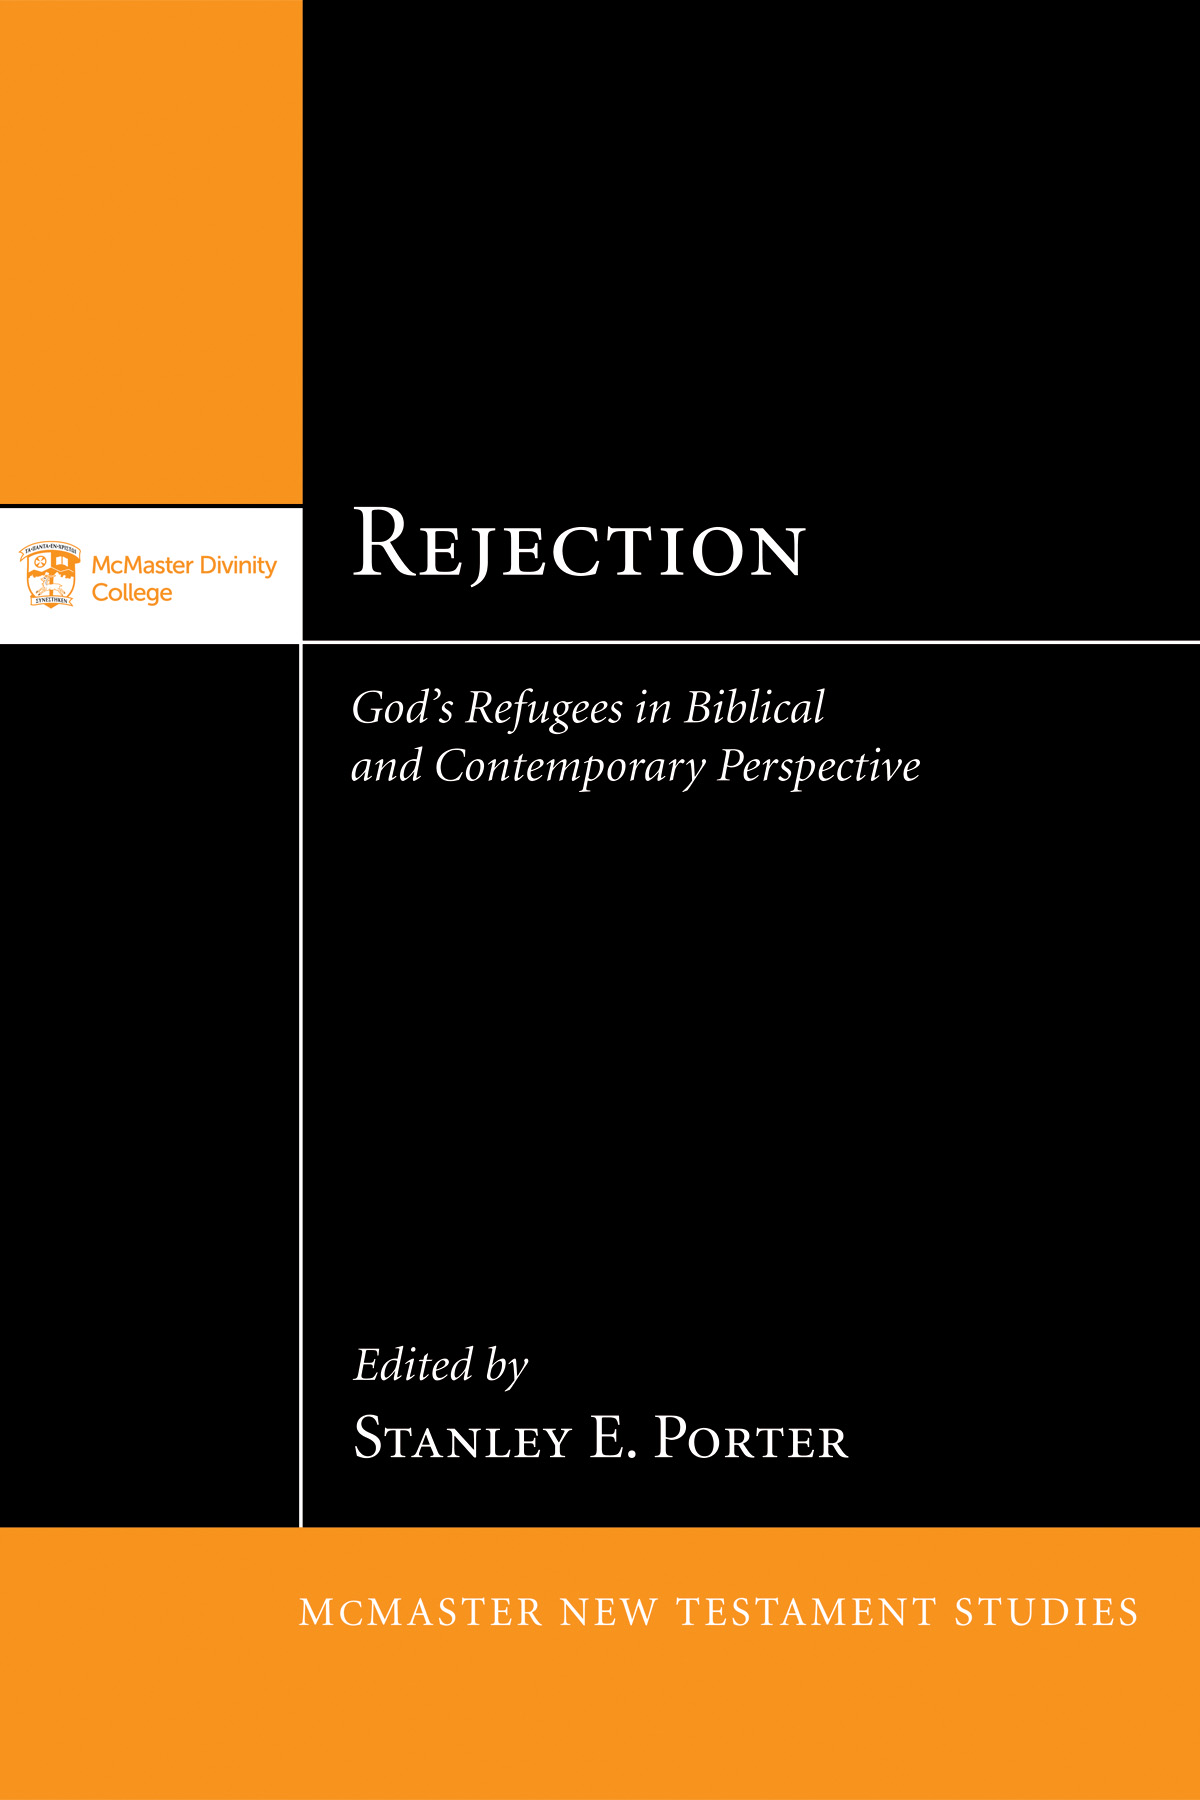 Rejection: God's Refugees in Biblical and Contemporary Perspective book cover